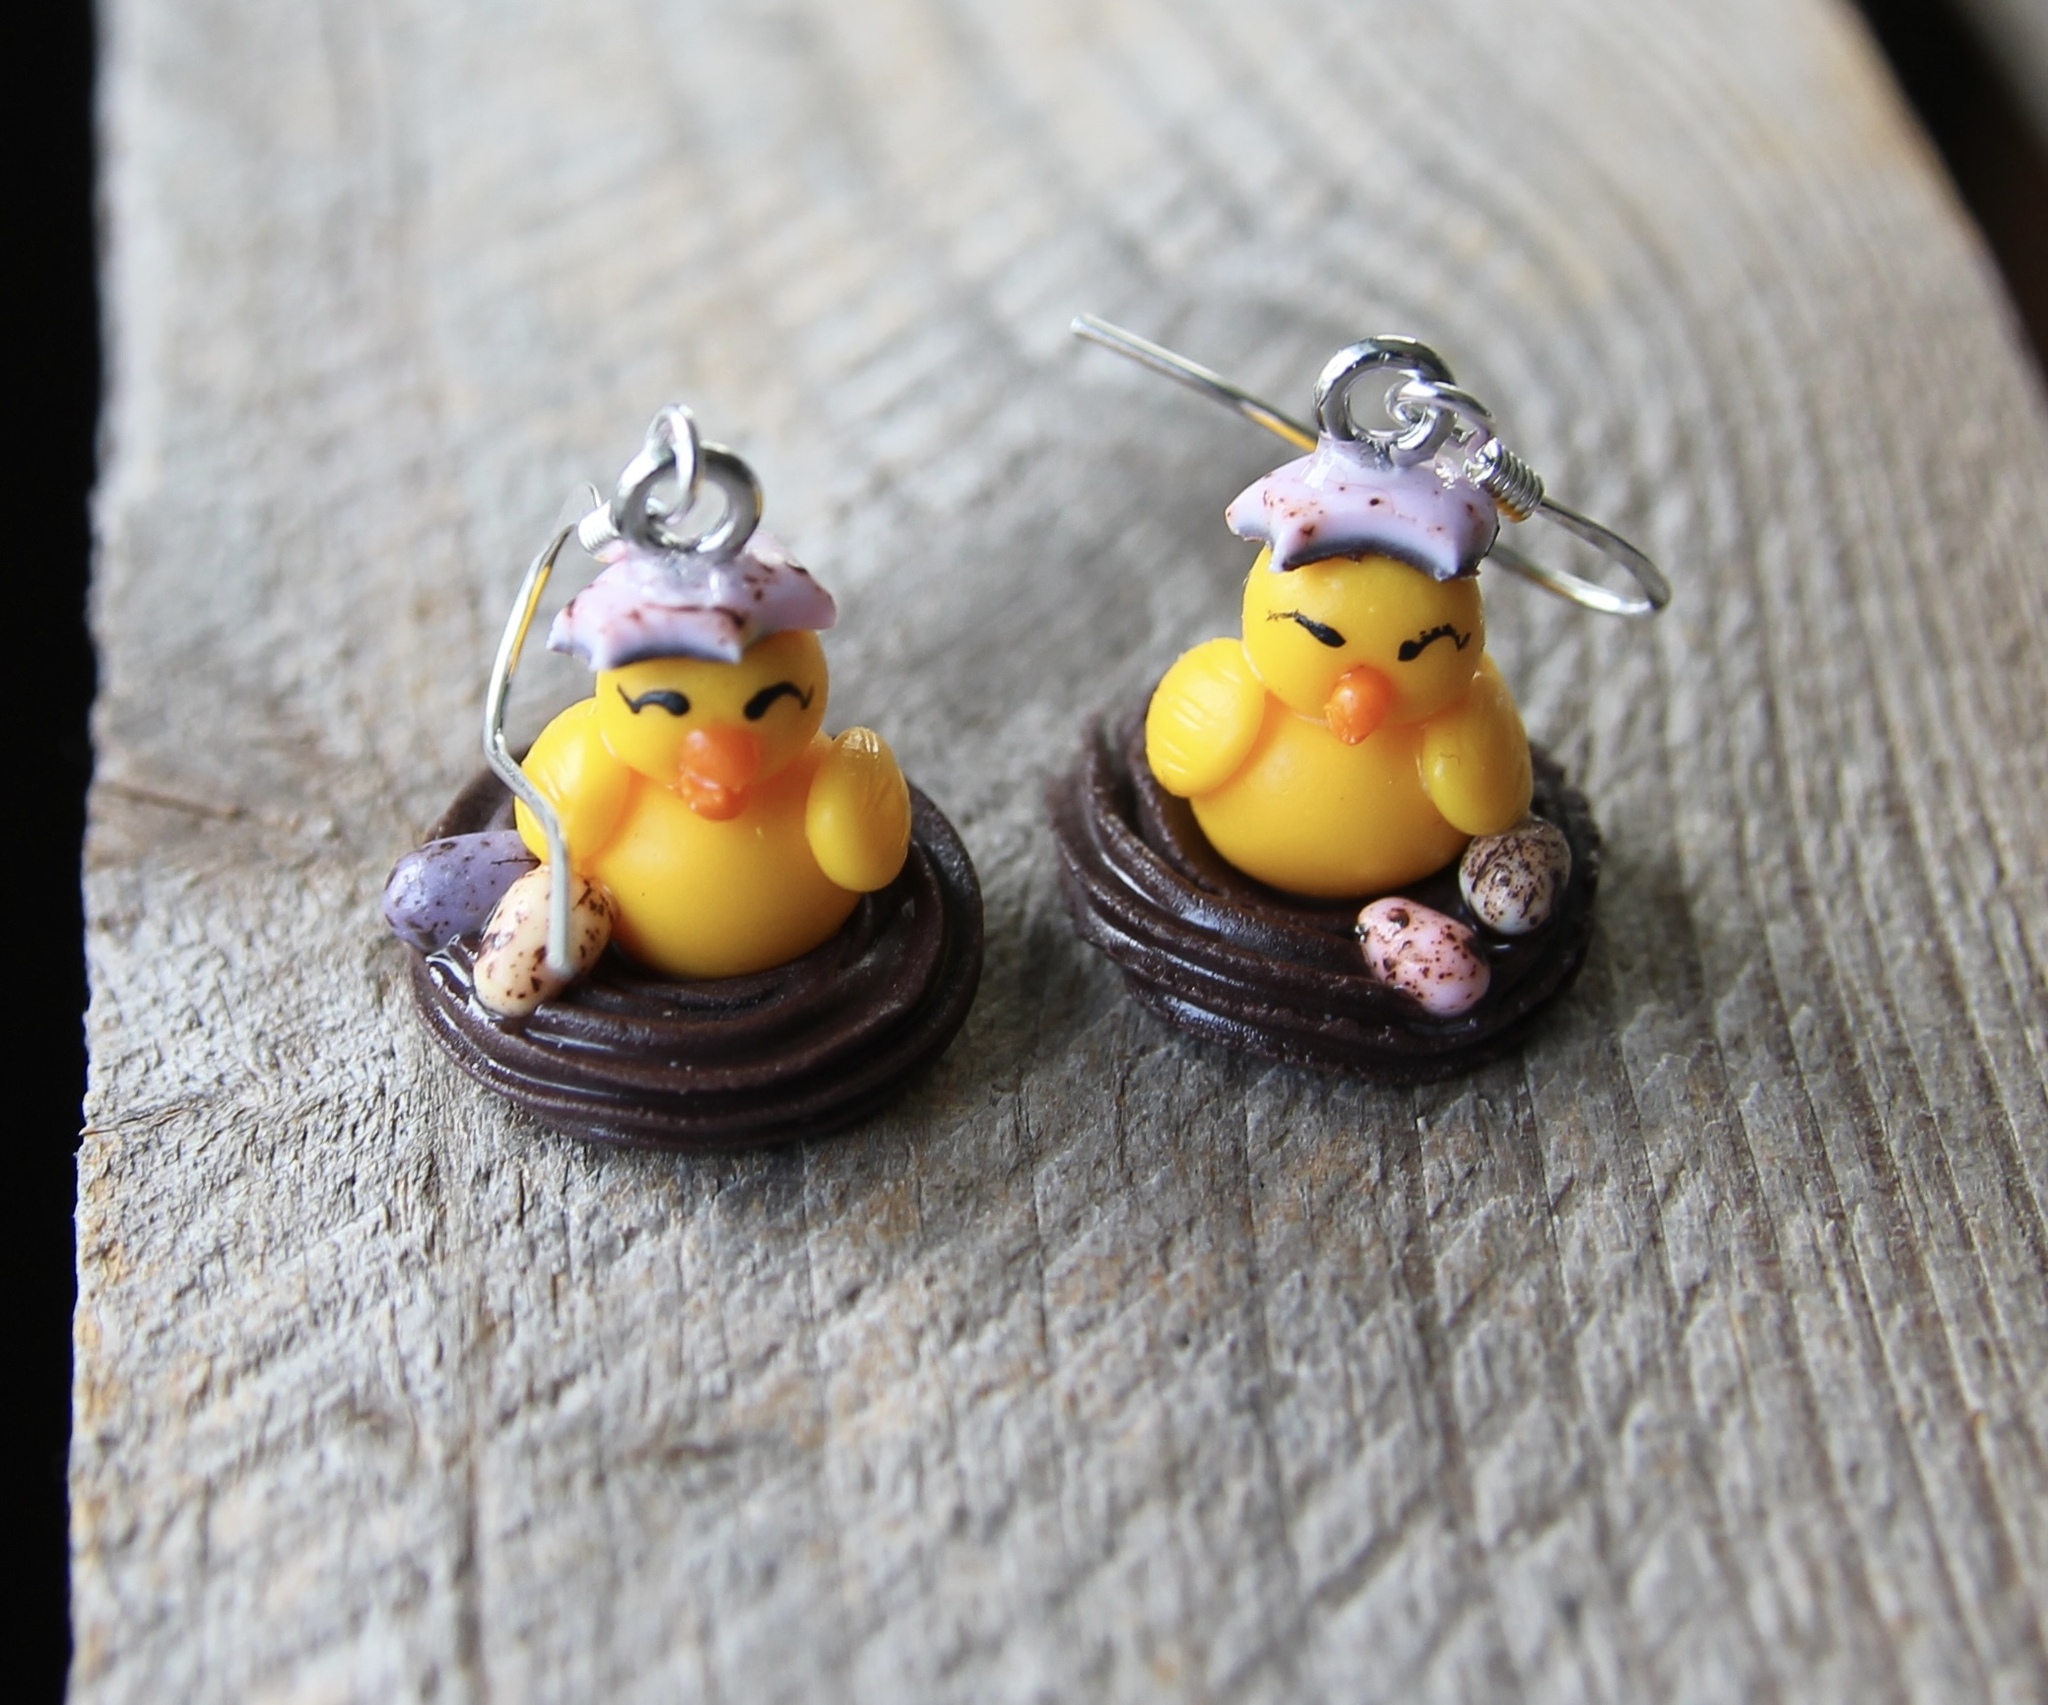 Earrings, chicks in a chocolate bird's nest with small chocolate eggs